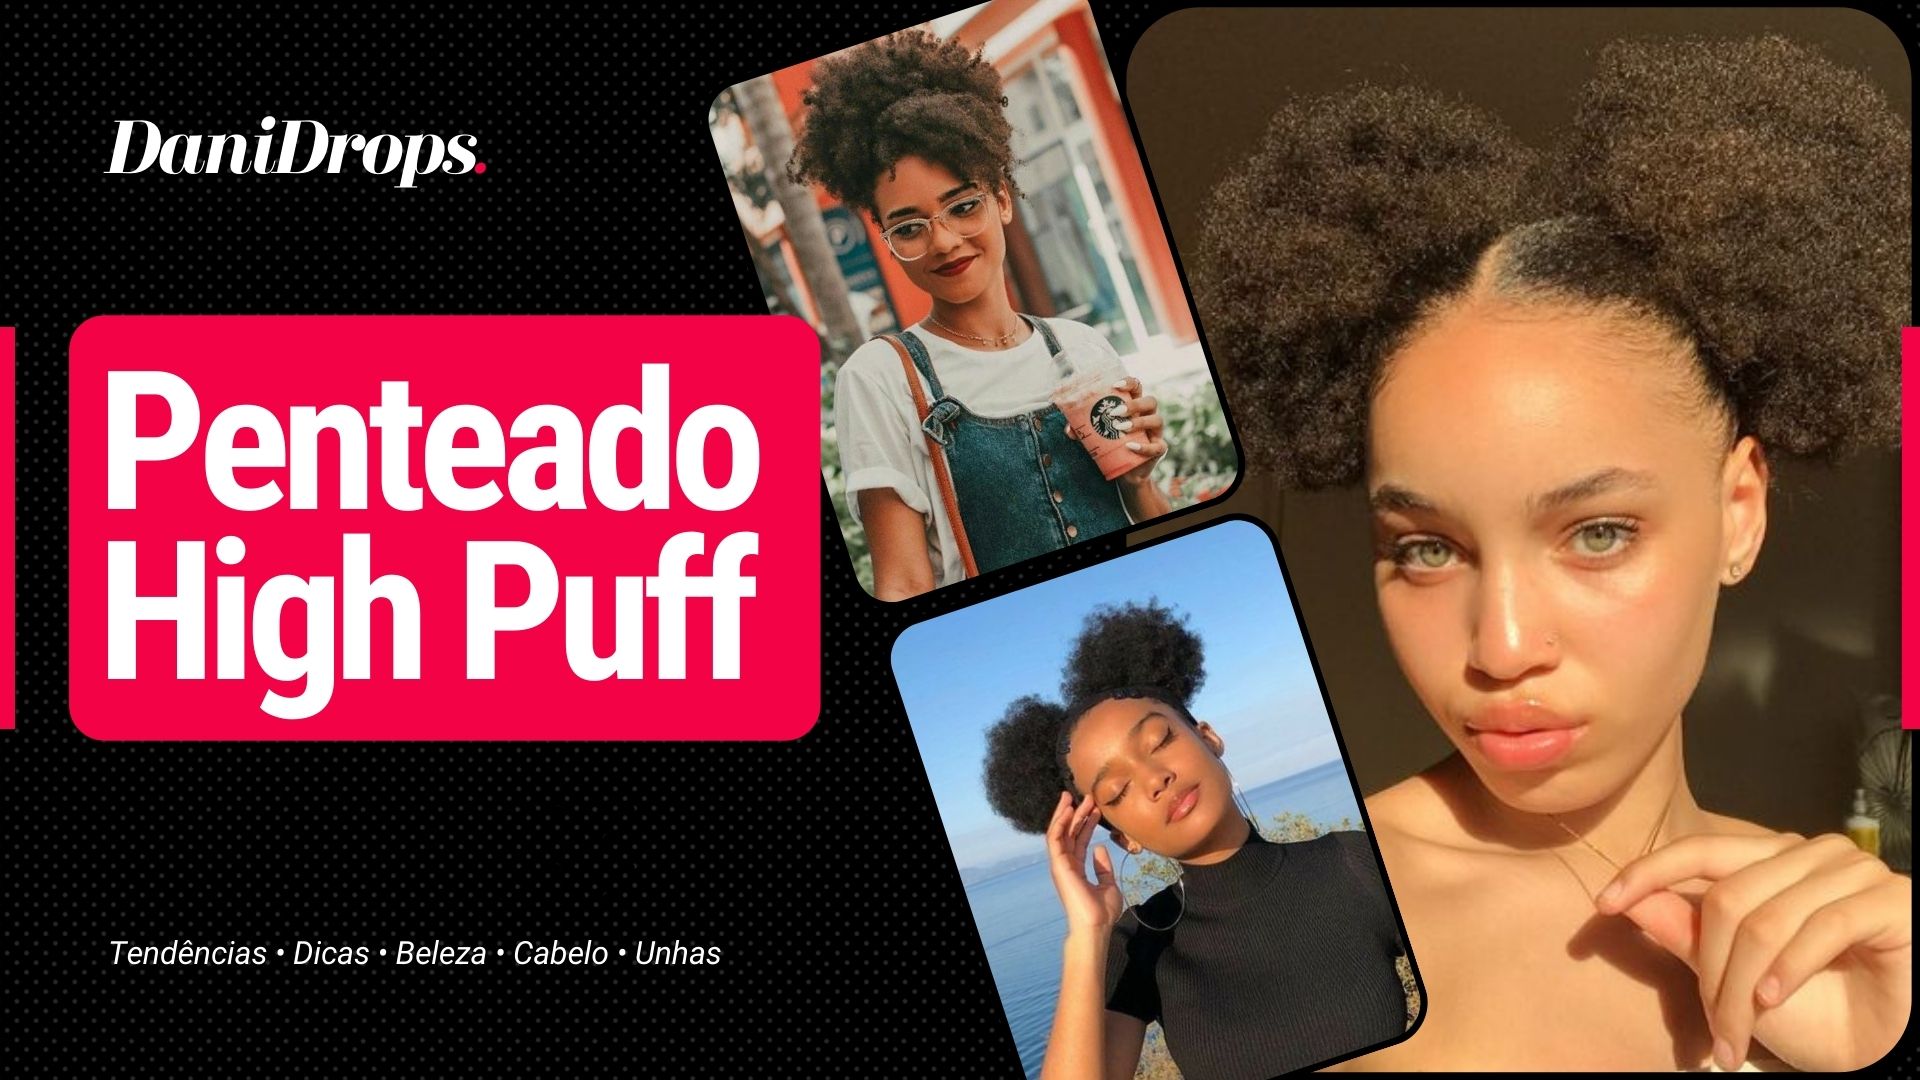 High puff hairstyles Stock Photos, Royalty Free High puff hairstyles Images  | Depositphotos